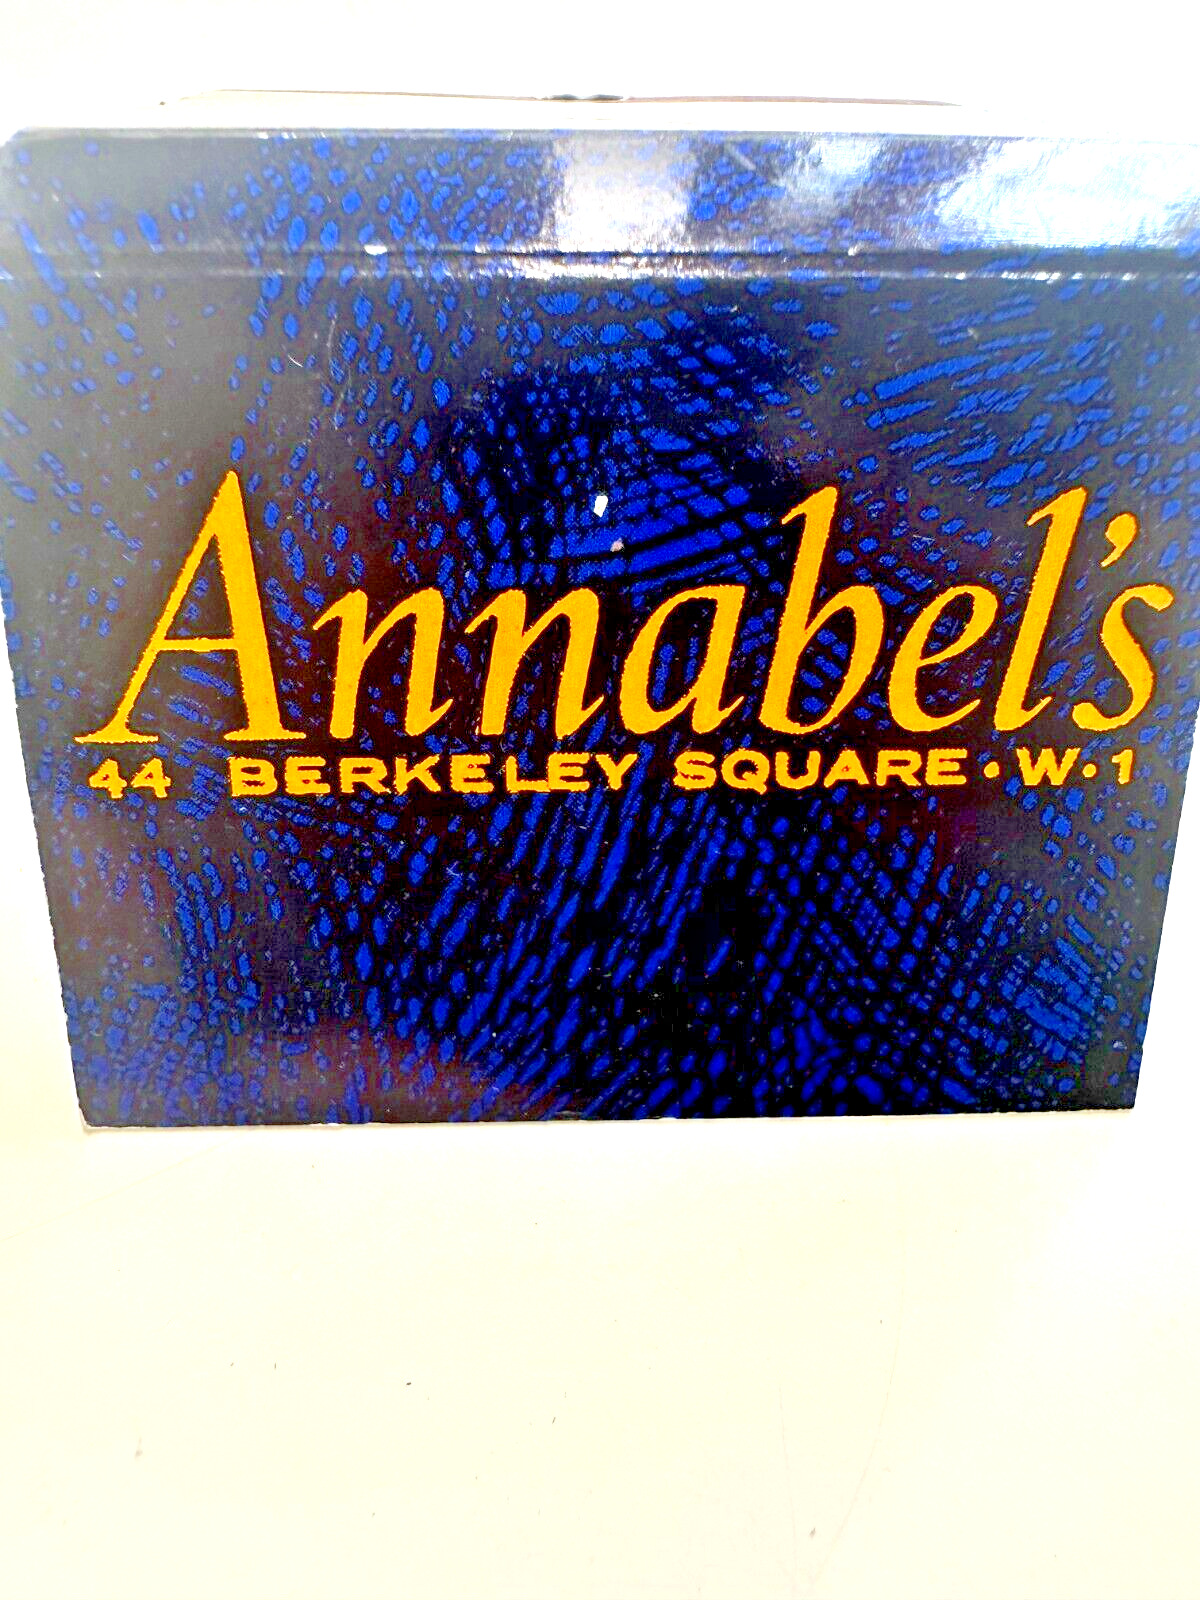 Vintage Annabel's London Matchbook - Rare Collectible